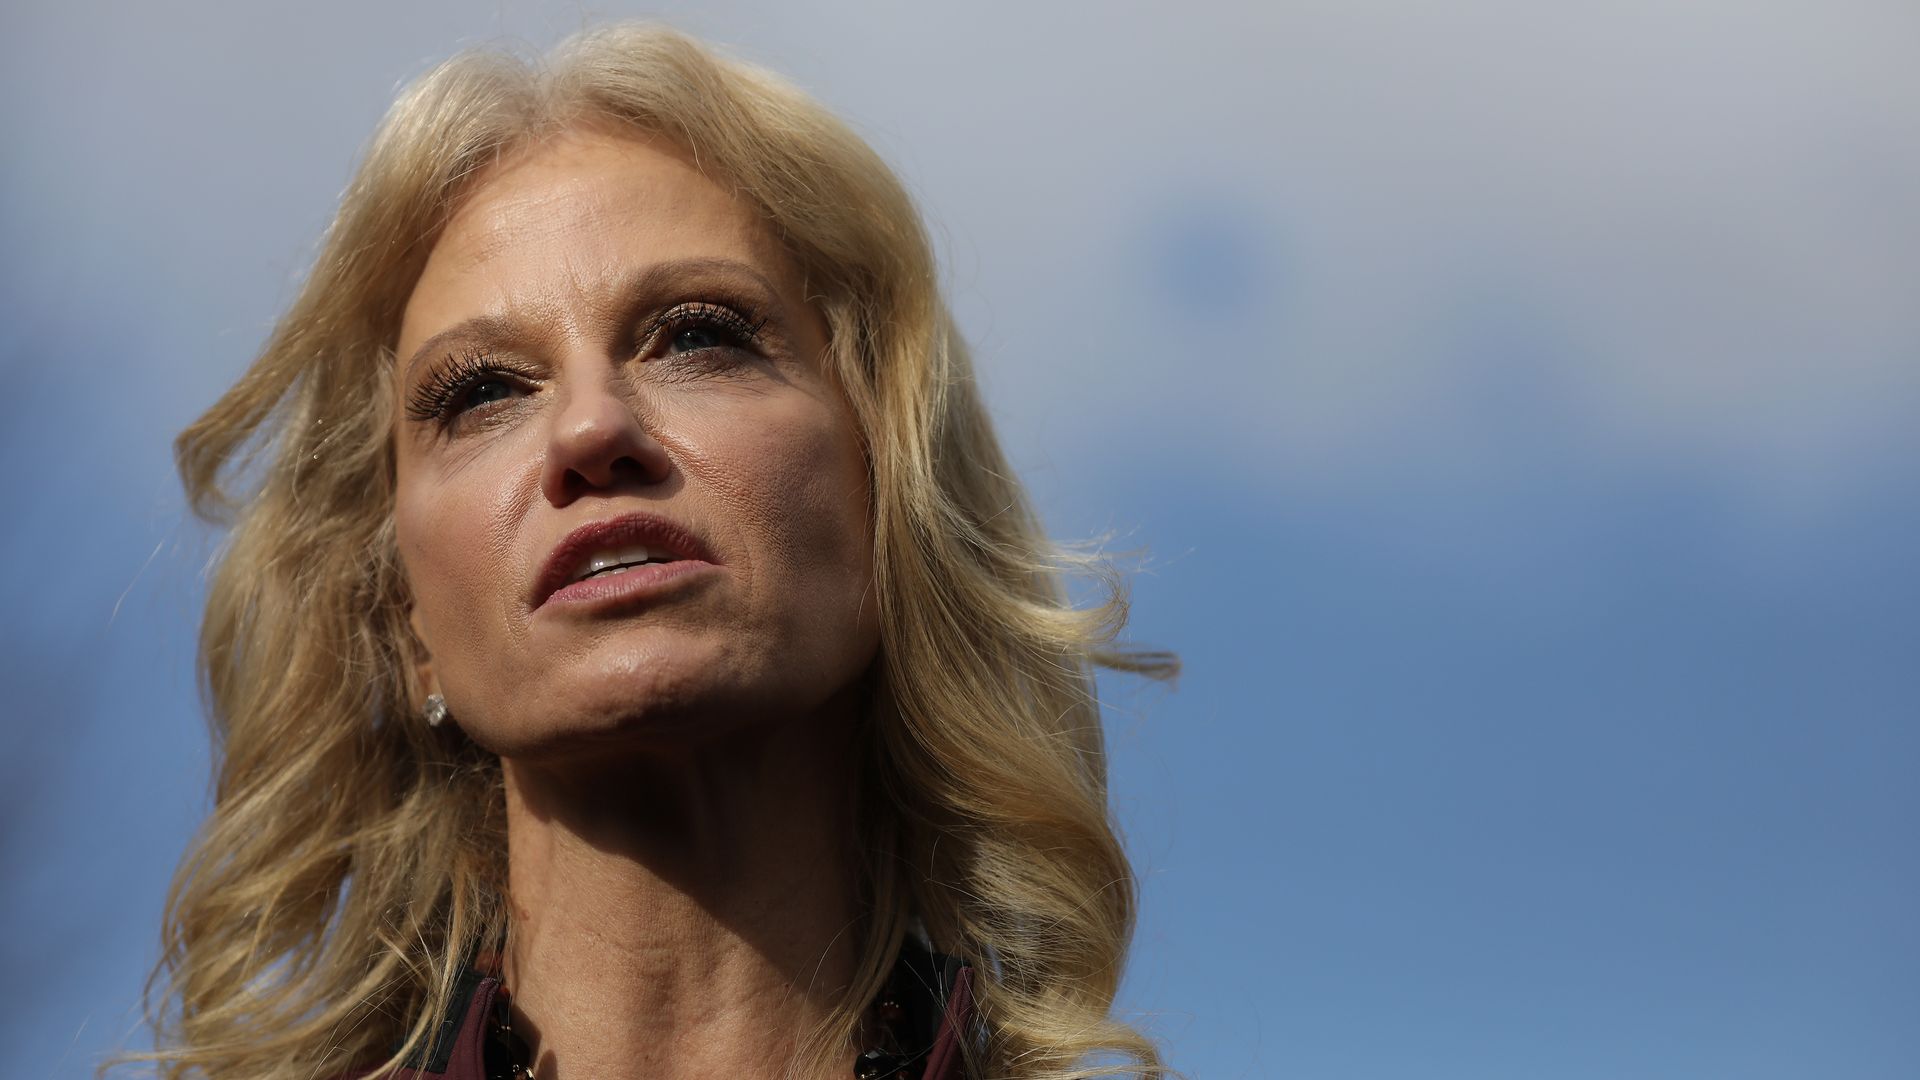 Kellyanne Conway defended President Trump and his administration on Fox News Wednesday.